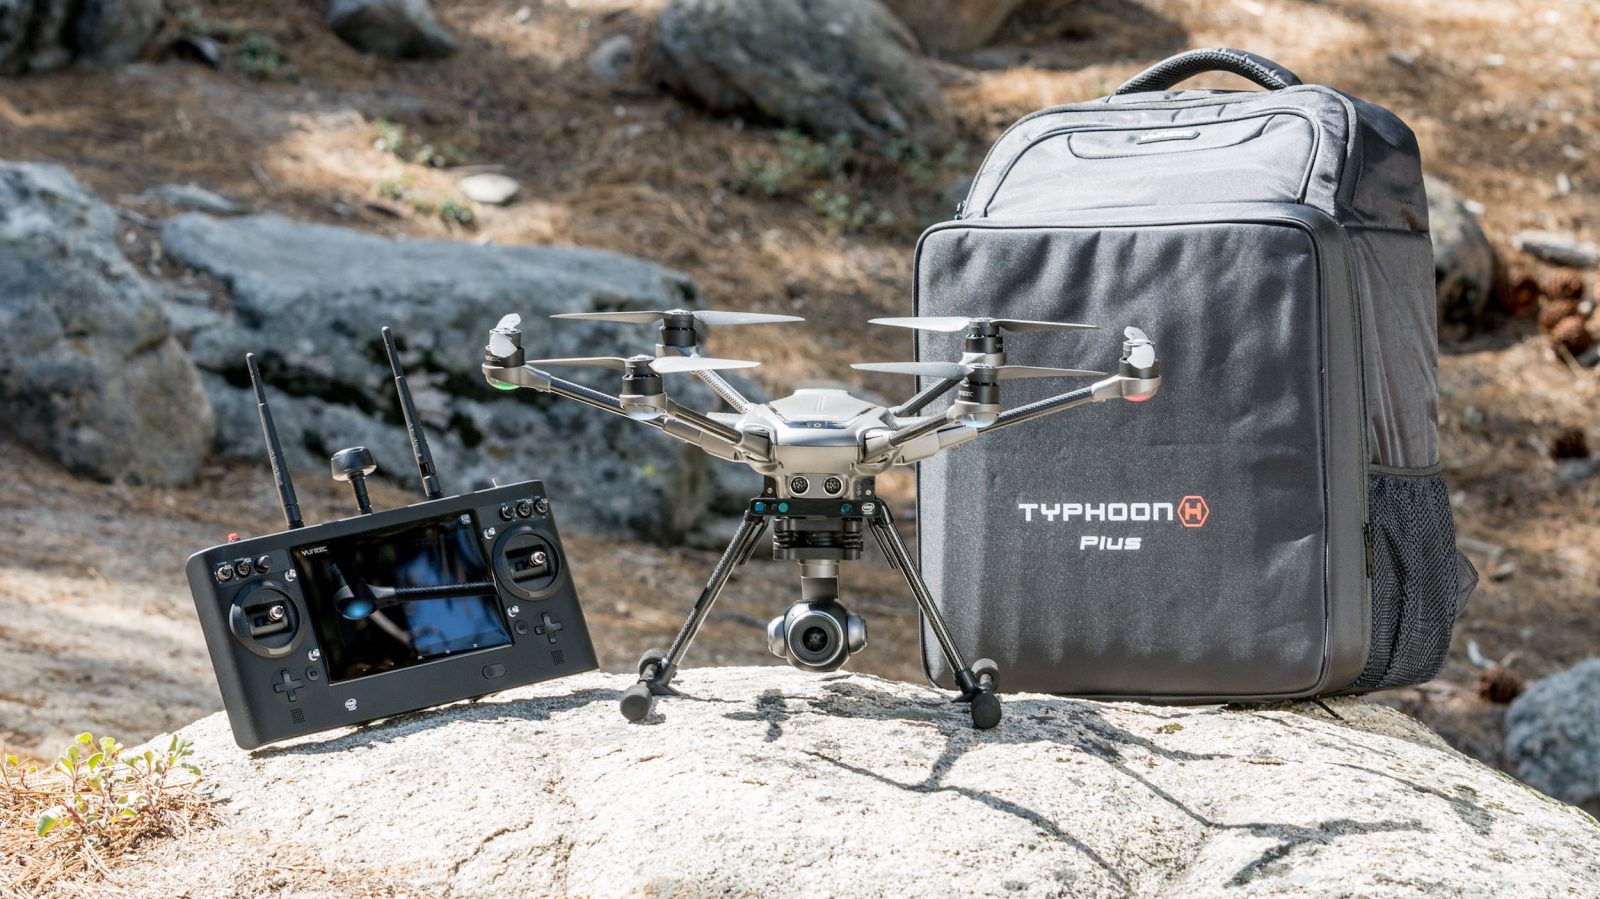 Yuneec introduces the Typhoon H Plus with Intel RealSense™ and other new and upgraded features